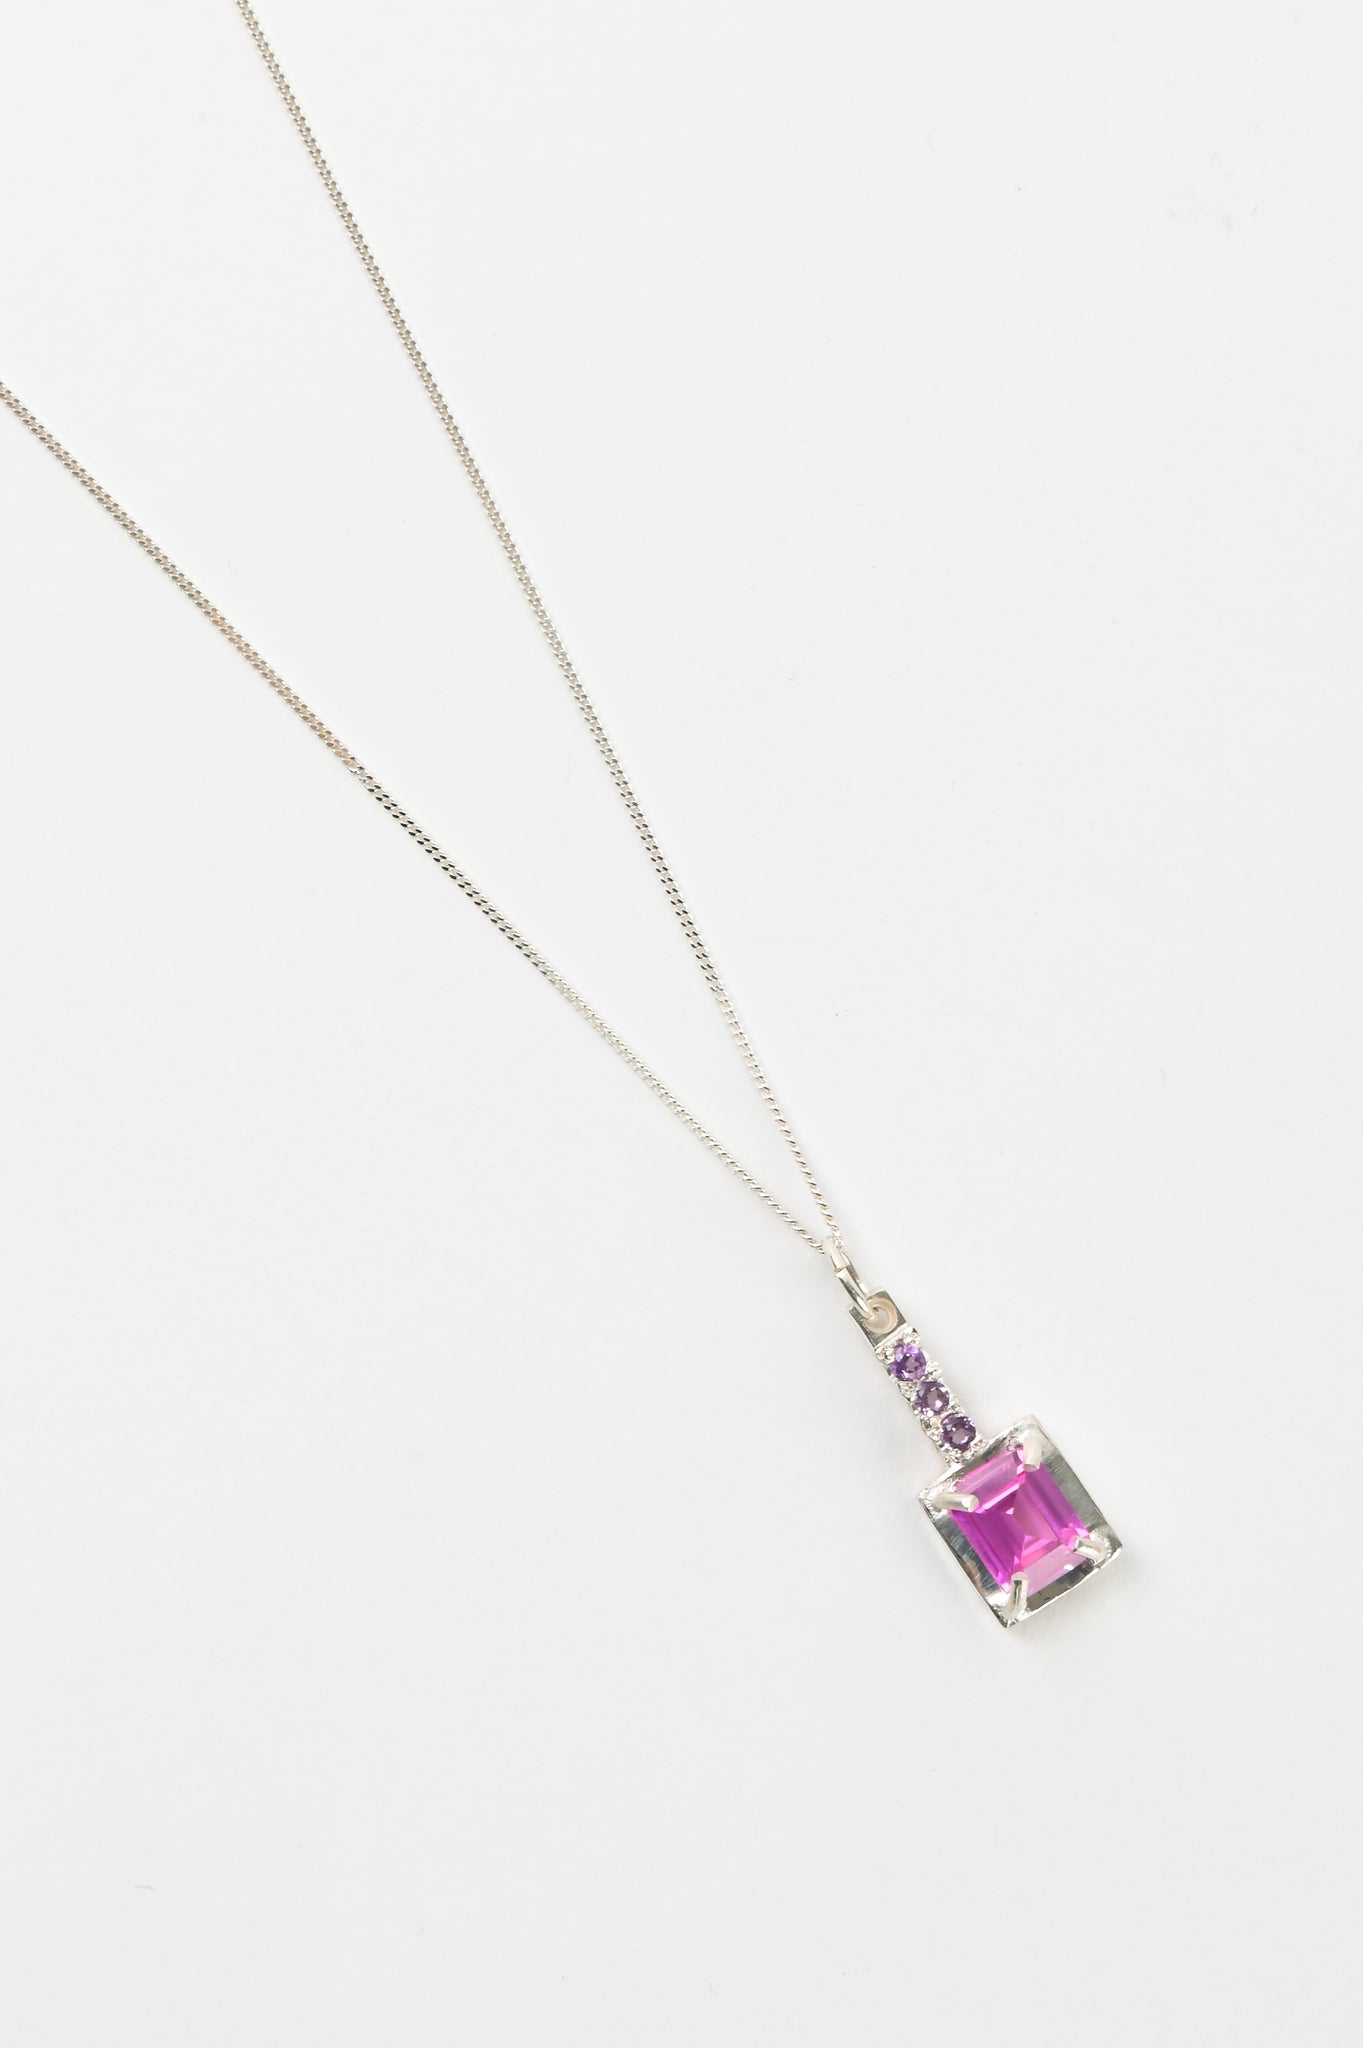 Oliver Thomas 'Etta' Necklace With Pink Sapphire